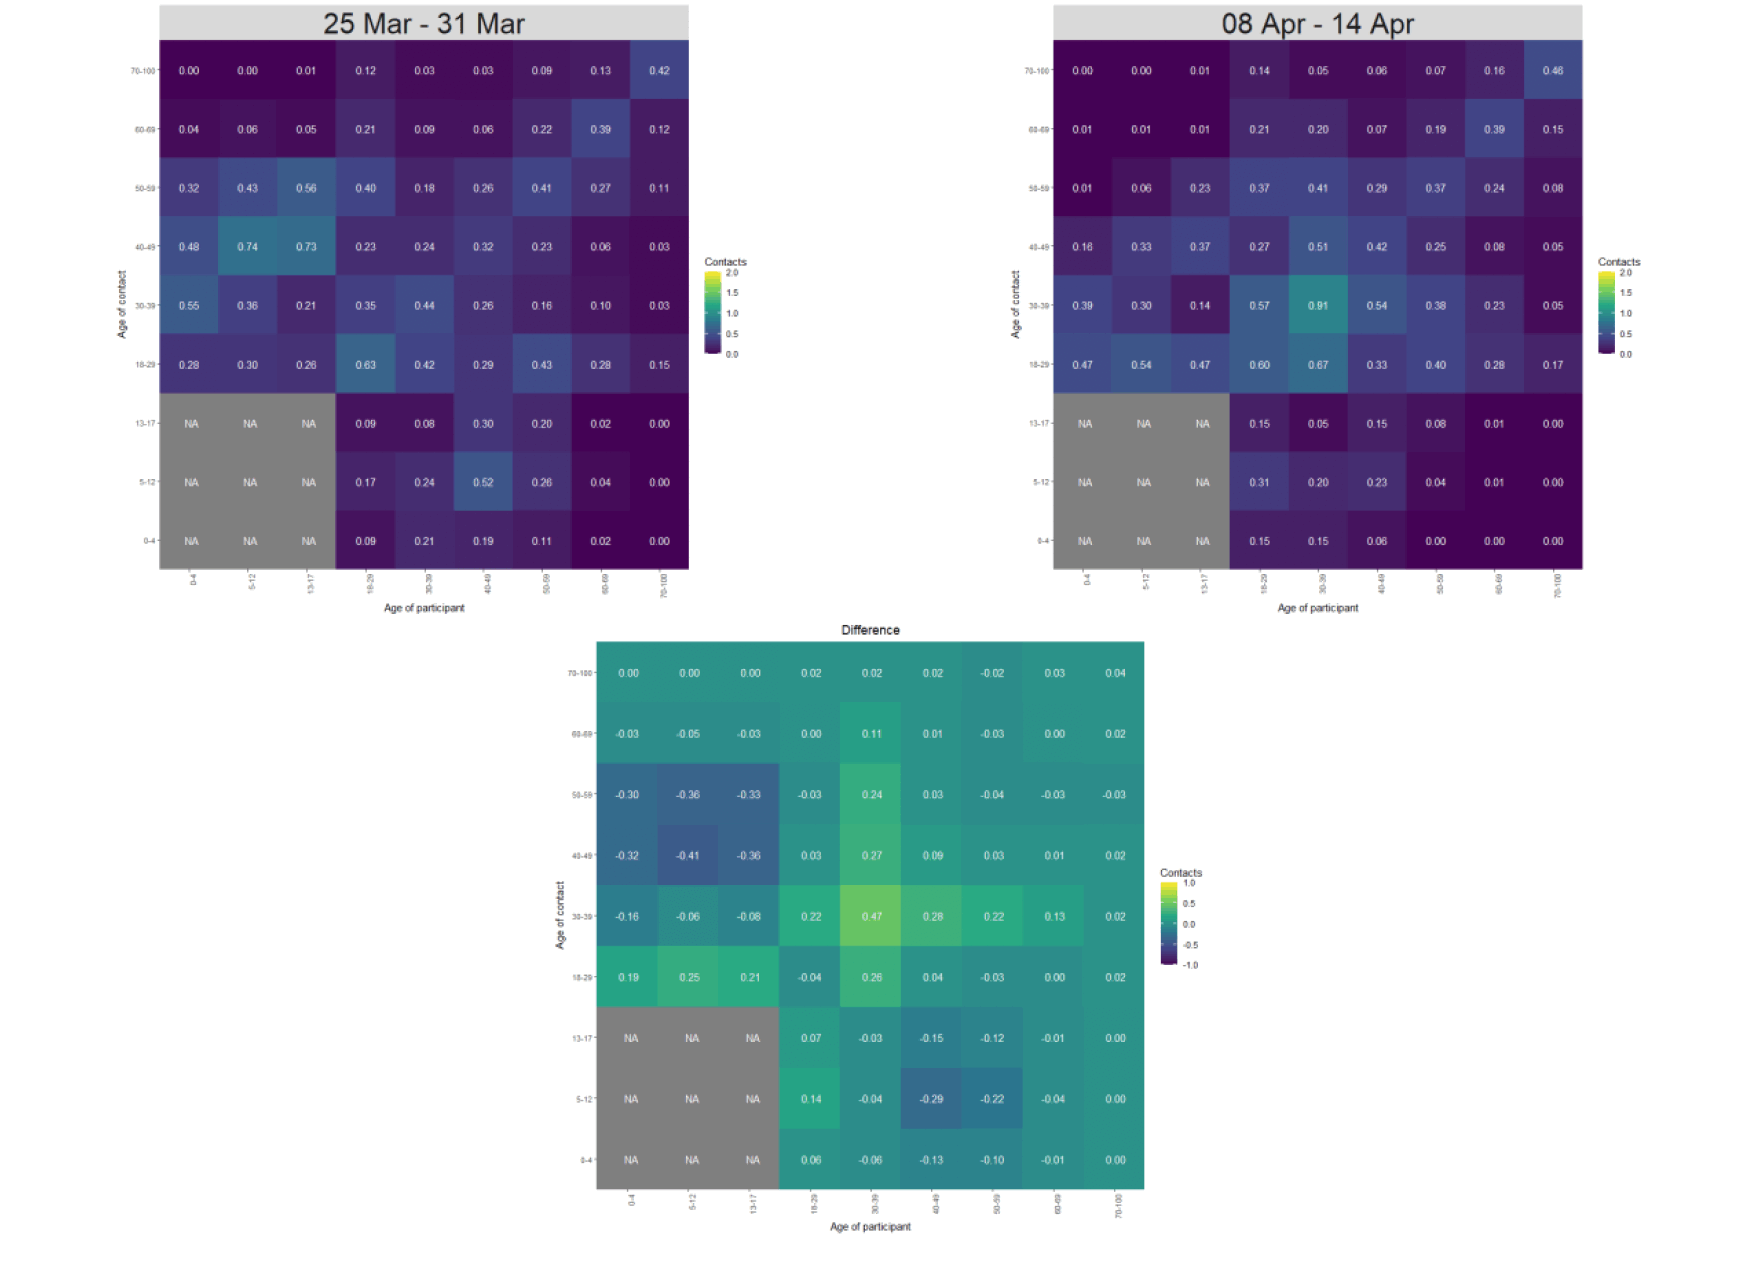 Heat maps showing the mean contacts by age group in the weeks of 25 Mar and 8 Apr.